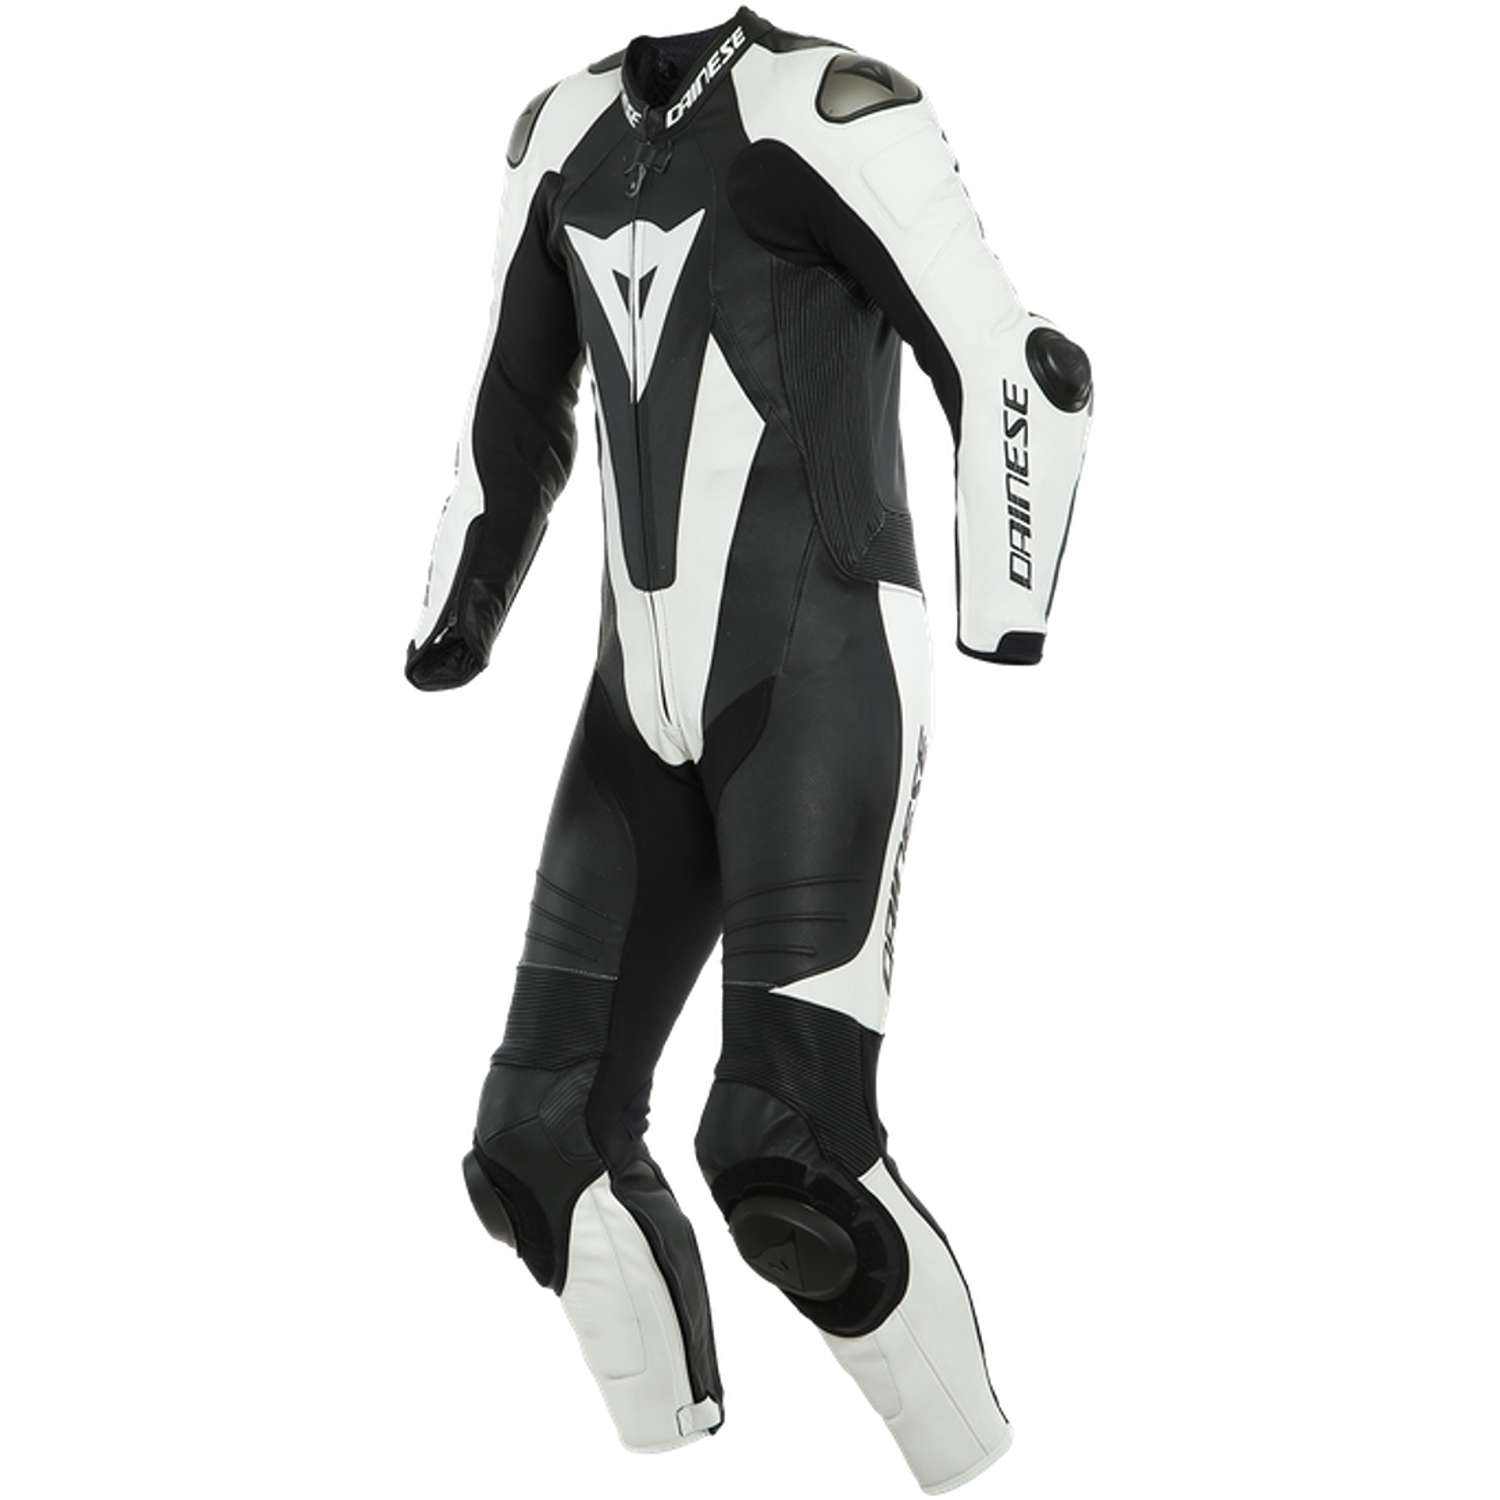 Image of Dainese Laguna Seca 5 1Pc Leather Suit Perf S/T Black White Größe 116